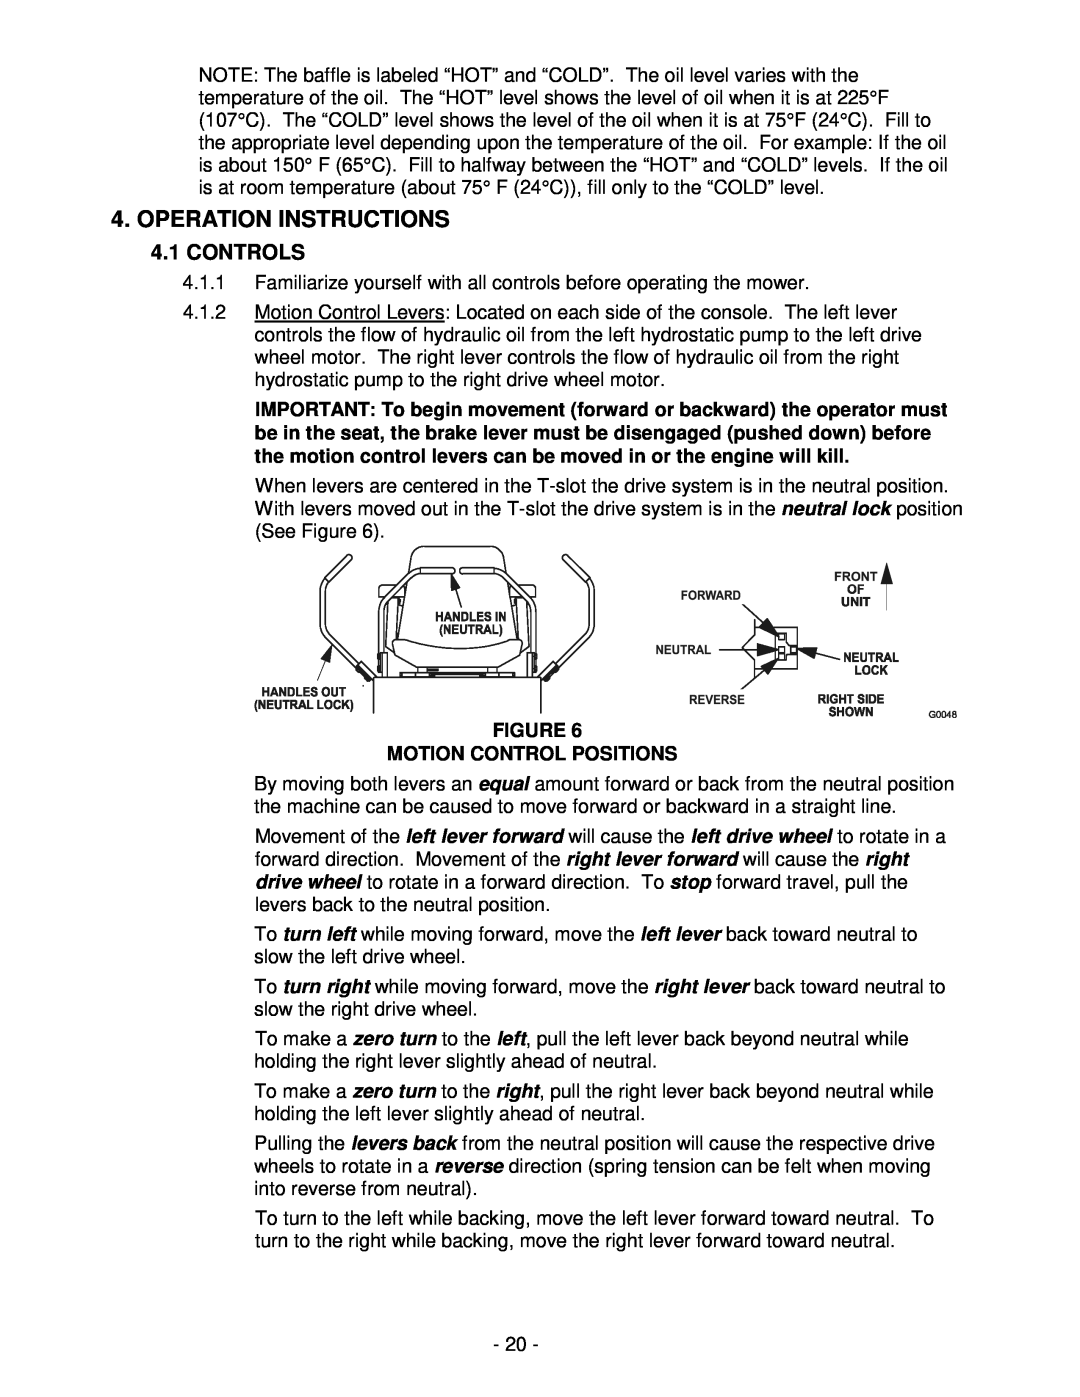 Exmark LAZER Z HP manual Operation Instructions, 4.1CONTROLS, Figure Motion Control Positions 